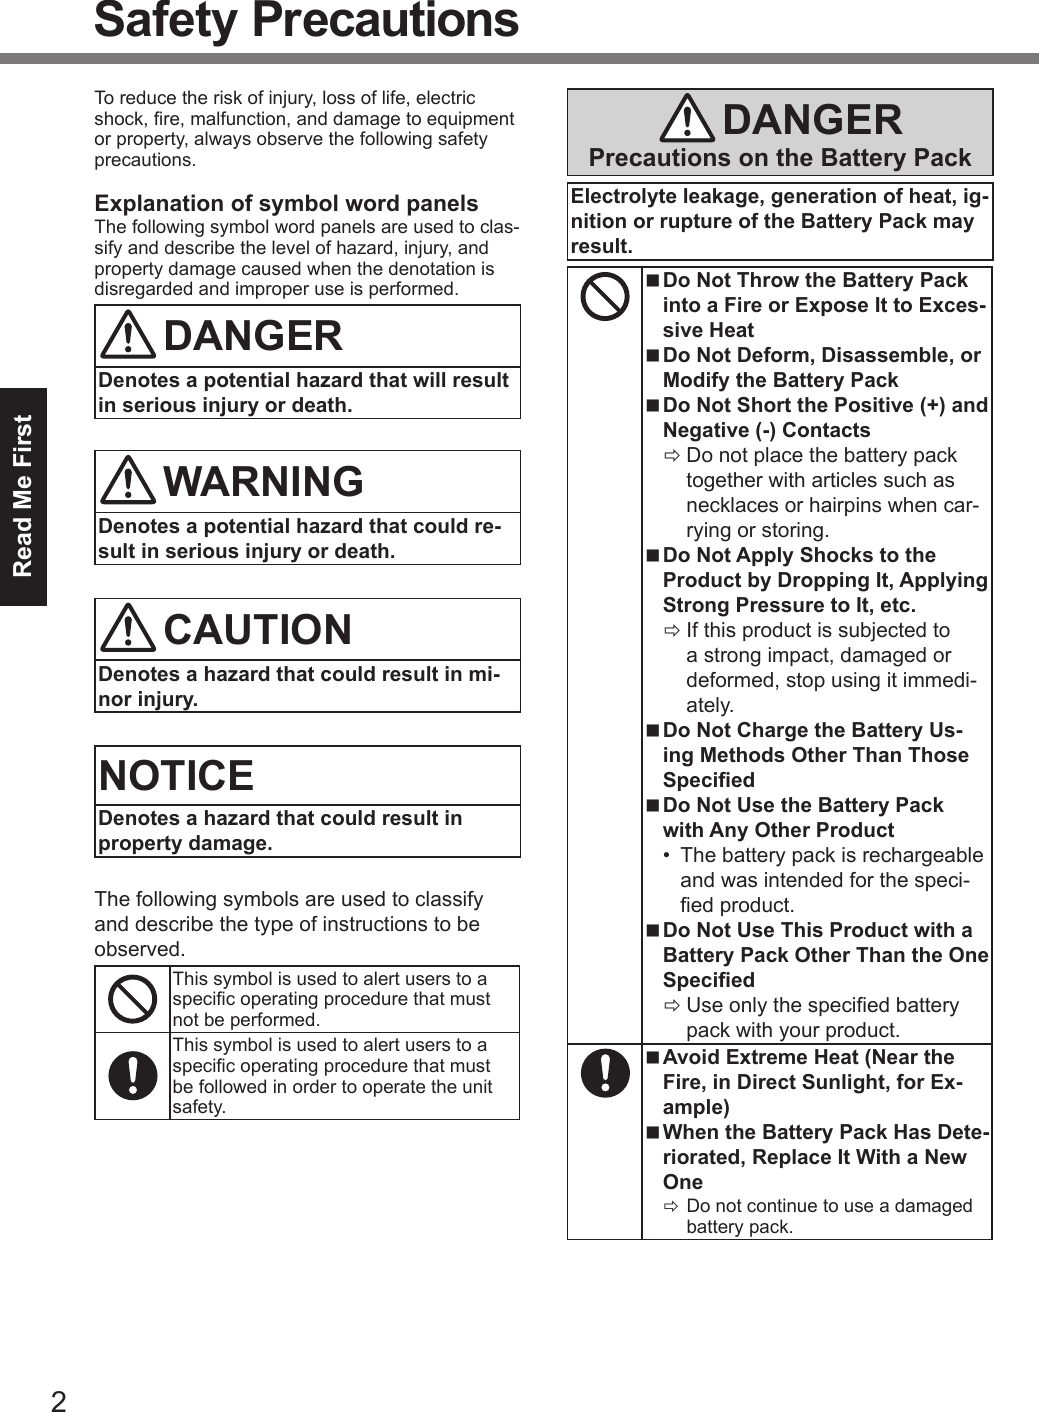 2Read Me FirstSafety PrecautionsTo reduce the risk of injury, loss of life, electric shock, re, malfunction, and damage to equipment or property, always observe the following safety precautions.Explanation of symbol word panelsThe following symbol word panels are used to clas-sify and describe the level of hazard, injury, and property damage caused when the denotation is disregarded and improper use is performed.DANGERDenotes a potential hazard that will result in serious injury or death.WARNINGDenotes a potential hazard that could re-sult in serious injury or death.CAUTIONDenotes a hazard that could result in mi-nor injury.NOTICEDenotes a hazard that could result in property damage.The following symbols are used to classify and describe the type of instructions to be observed.This symbol is used to alert users to a specic operating procedure that must not be performed.This symbol is used to alert users to a specic operating procedure that must be followed in order to operate the unit safety.DANGERPrecautions on the Battery PackElectrolyte leakage, generation of heat, ig-nition or rupture of the Battery Pack may result. nDo Not Throw the Battery Pack into a Fire or Expose It to Exces-sive Heat nDo Not Deform, Disassemble, or Modify the Battery Pack nDo Not Short the Positive (+) and Negative (-) Contacts ÖDo not place the battery pack together with articles such as necklaces or hairpins when car-rying or storing. nDo Not Apply Shocks to the Product by Dropping It, Applying Strong Pressure to It, etc. ÖIf this product is subjected to a strong impact, damaged or deformed, stop using it immedi-ately. nDo Not Charge the Battery Us-ing Methods Other Than Those Specied nDo Not Use the Battery Pack with Any Other Product•  The battery pack is rechargeable and was intended for the speci-ed product. nDo Not Use This Product with a Battery Pack Other Than the One Specied ÖUse only the specied battery pack with your product. nAvoid Extreme Heat (Near the Fire, in Direct Sunlight, for Ex-ample) nWhen the Battery Pack Has Dete-riorated, Replace It With a New One ÖDo not continue to use a damaged battery pack.